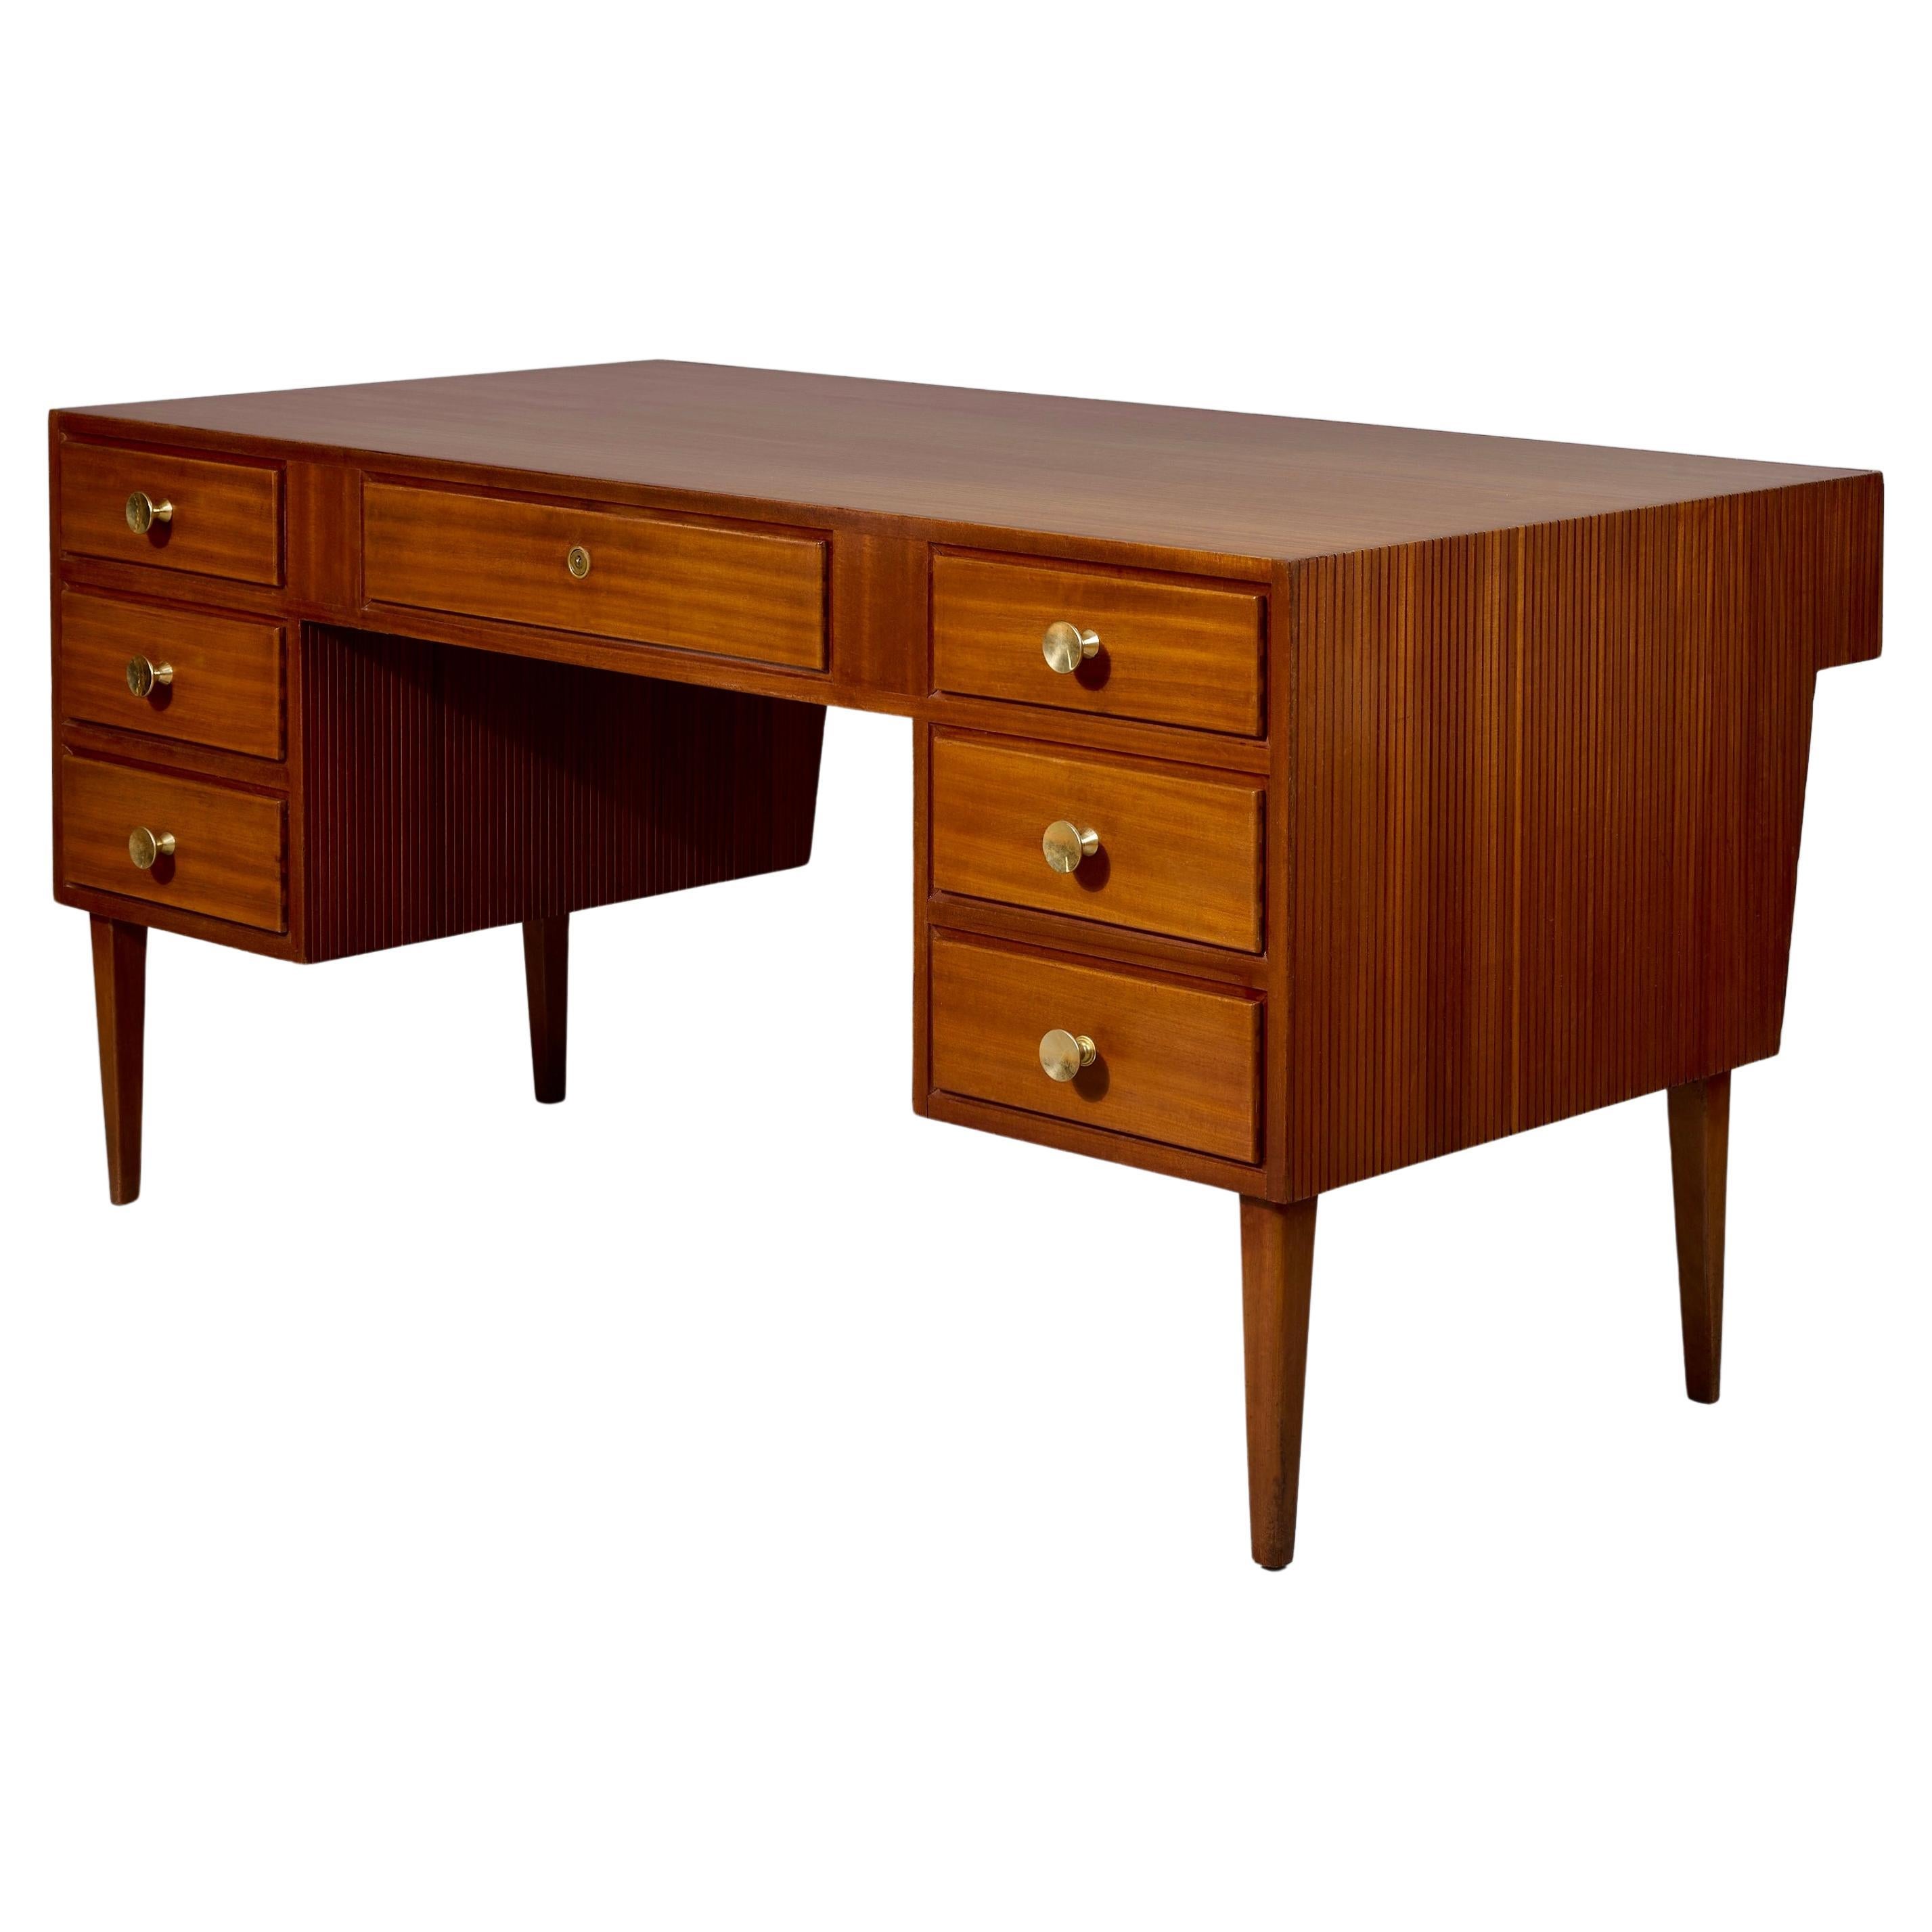 Gio Ponti: Monumental Executive Desk in Reeded Walnut and Brass, Italy 1950s For Sale